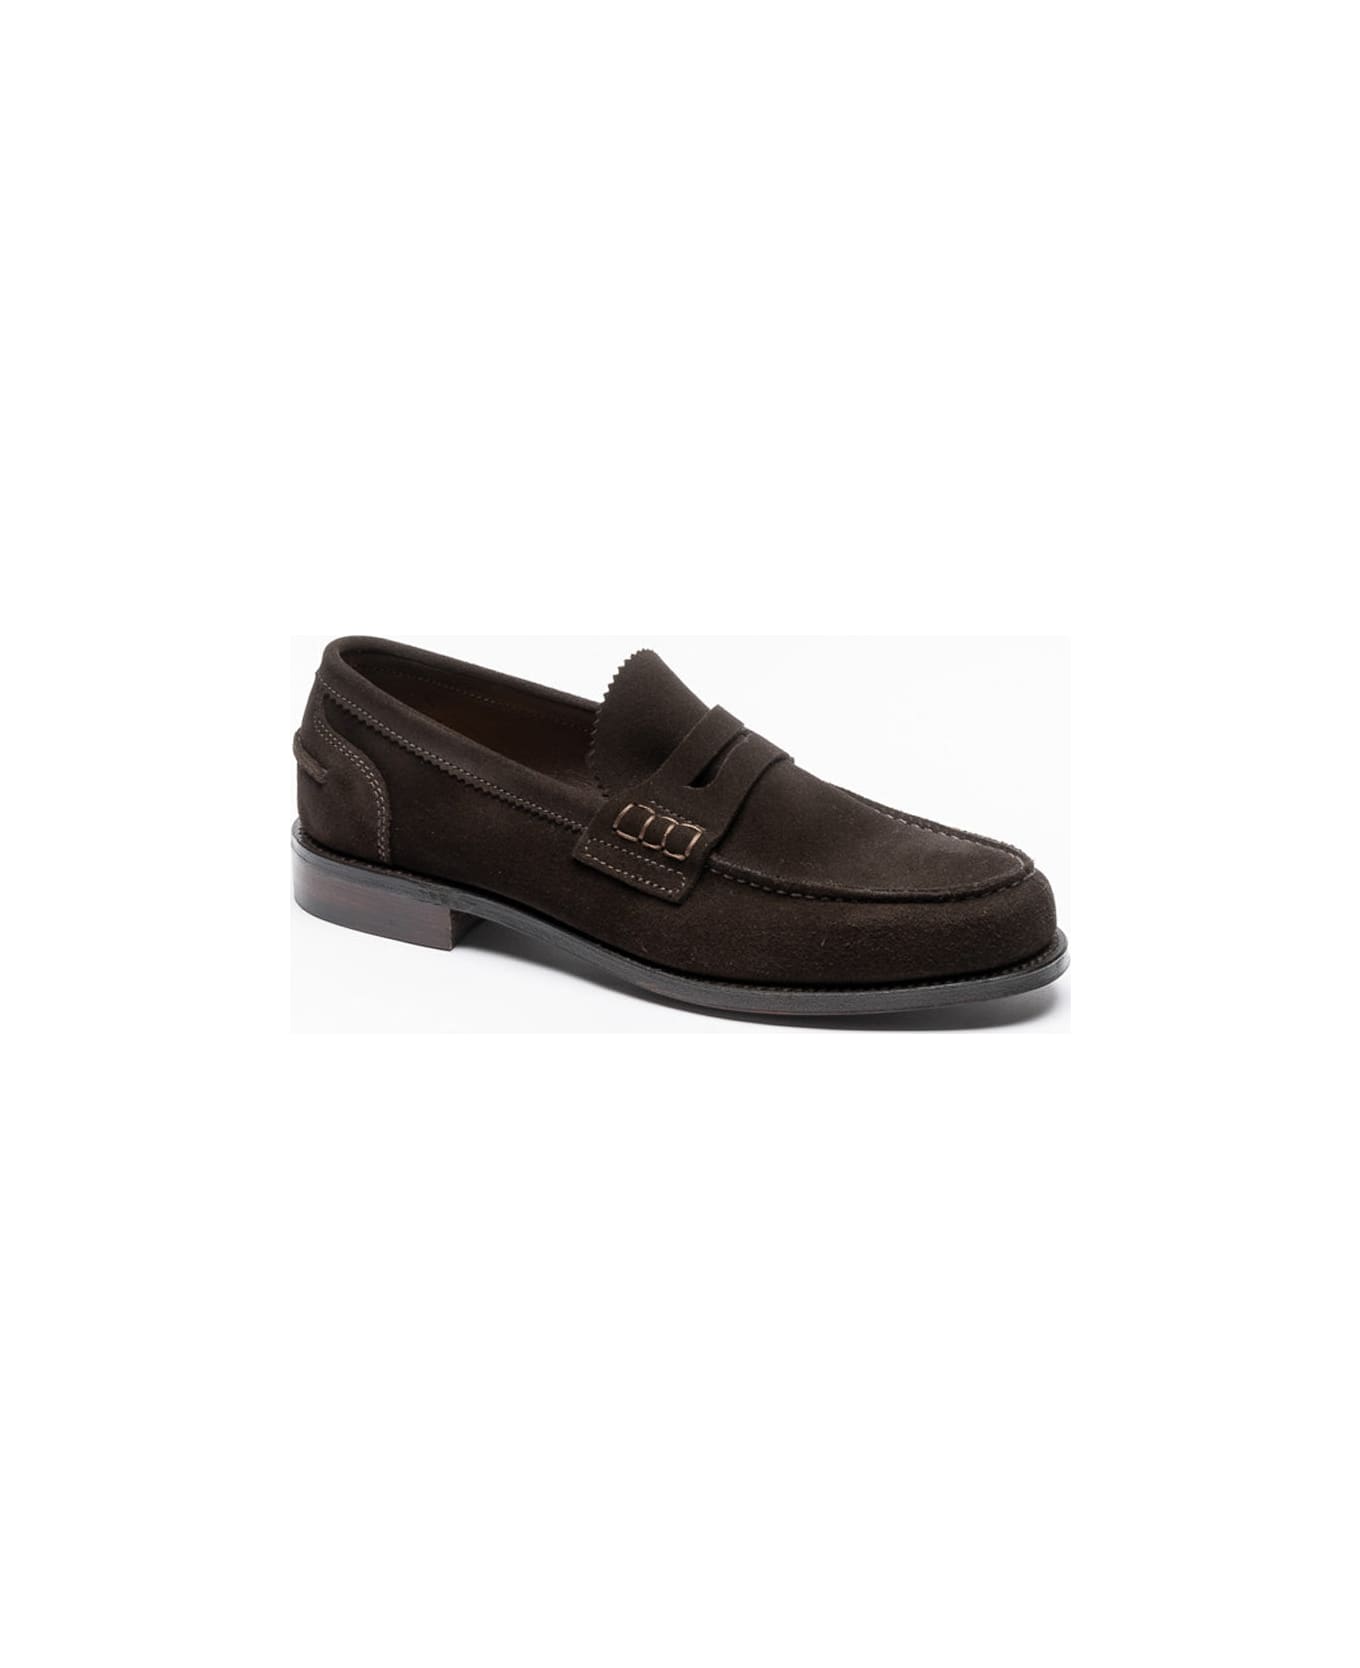 Cheaney Bitter Chocolate Suede Penny Loafer - Marrone